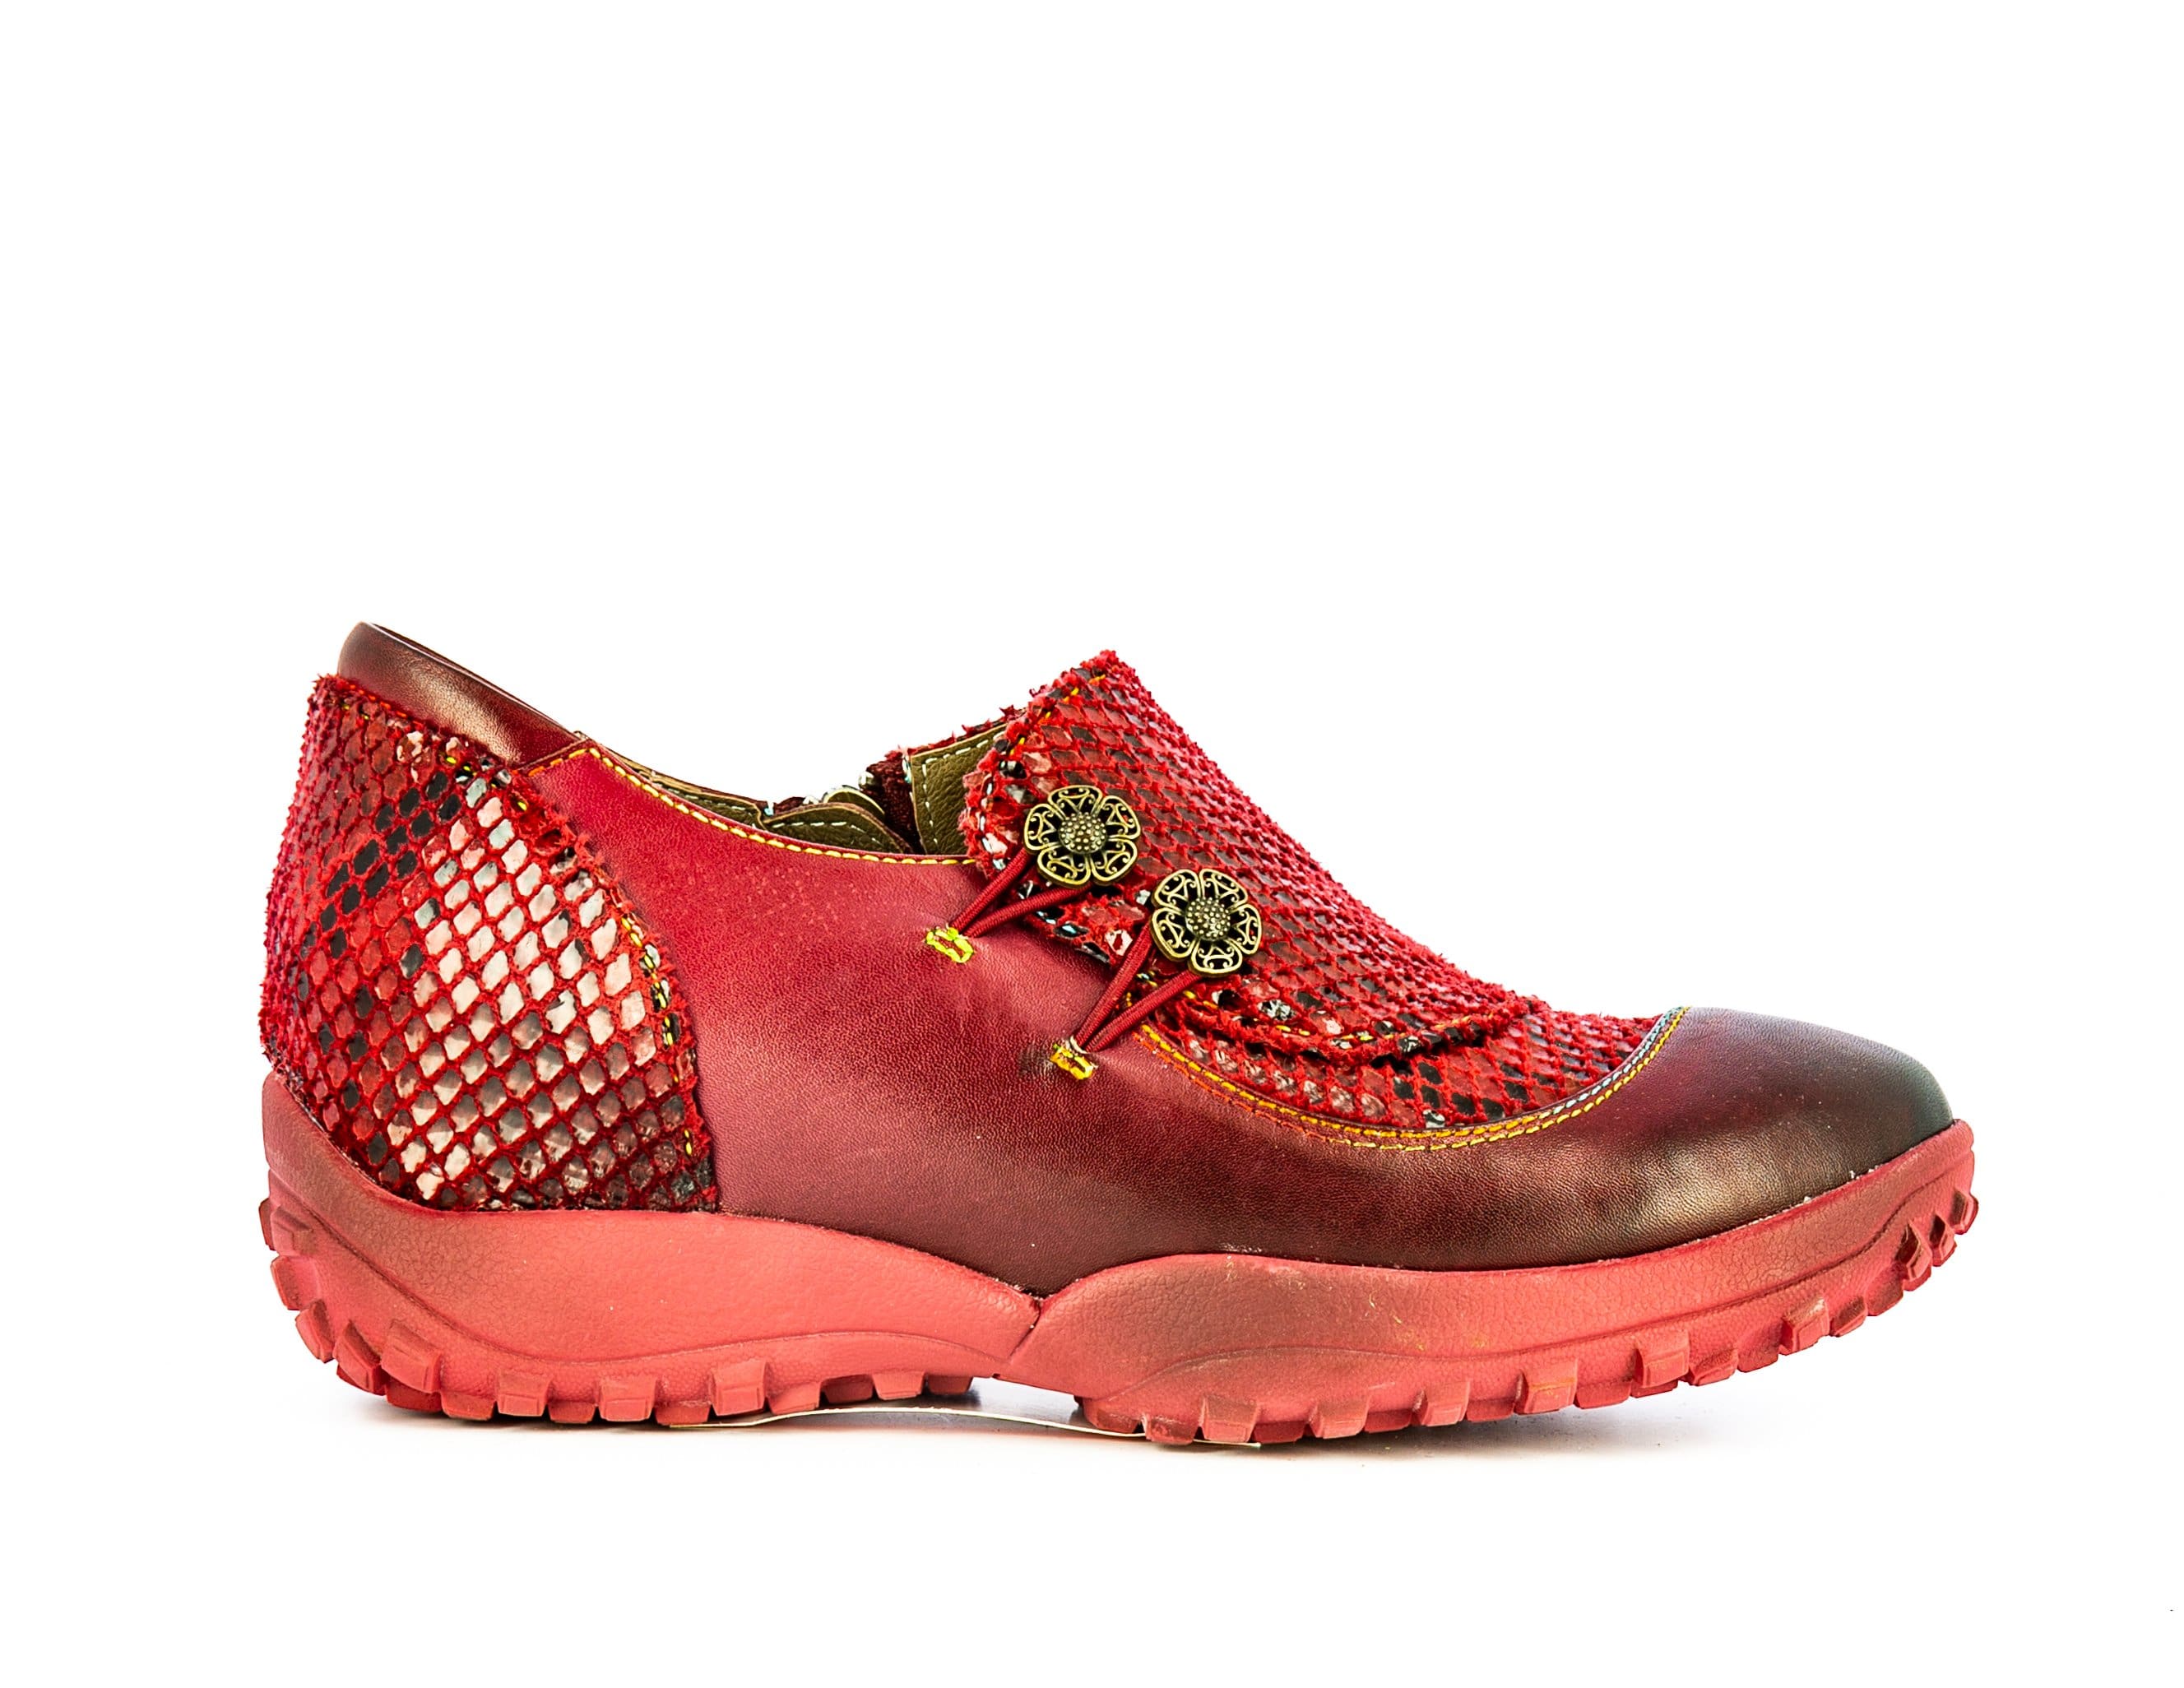 Chaussure CYCNTHIAO 13 - 35 / Rouge - Mocassin